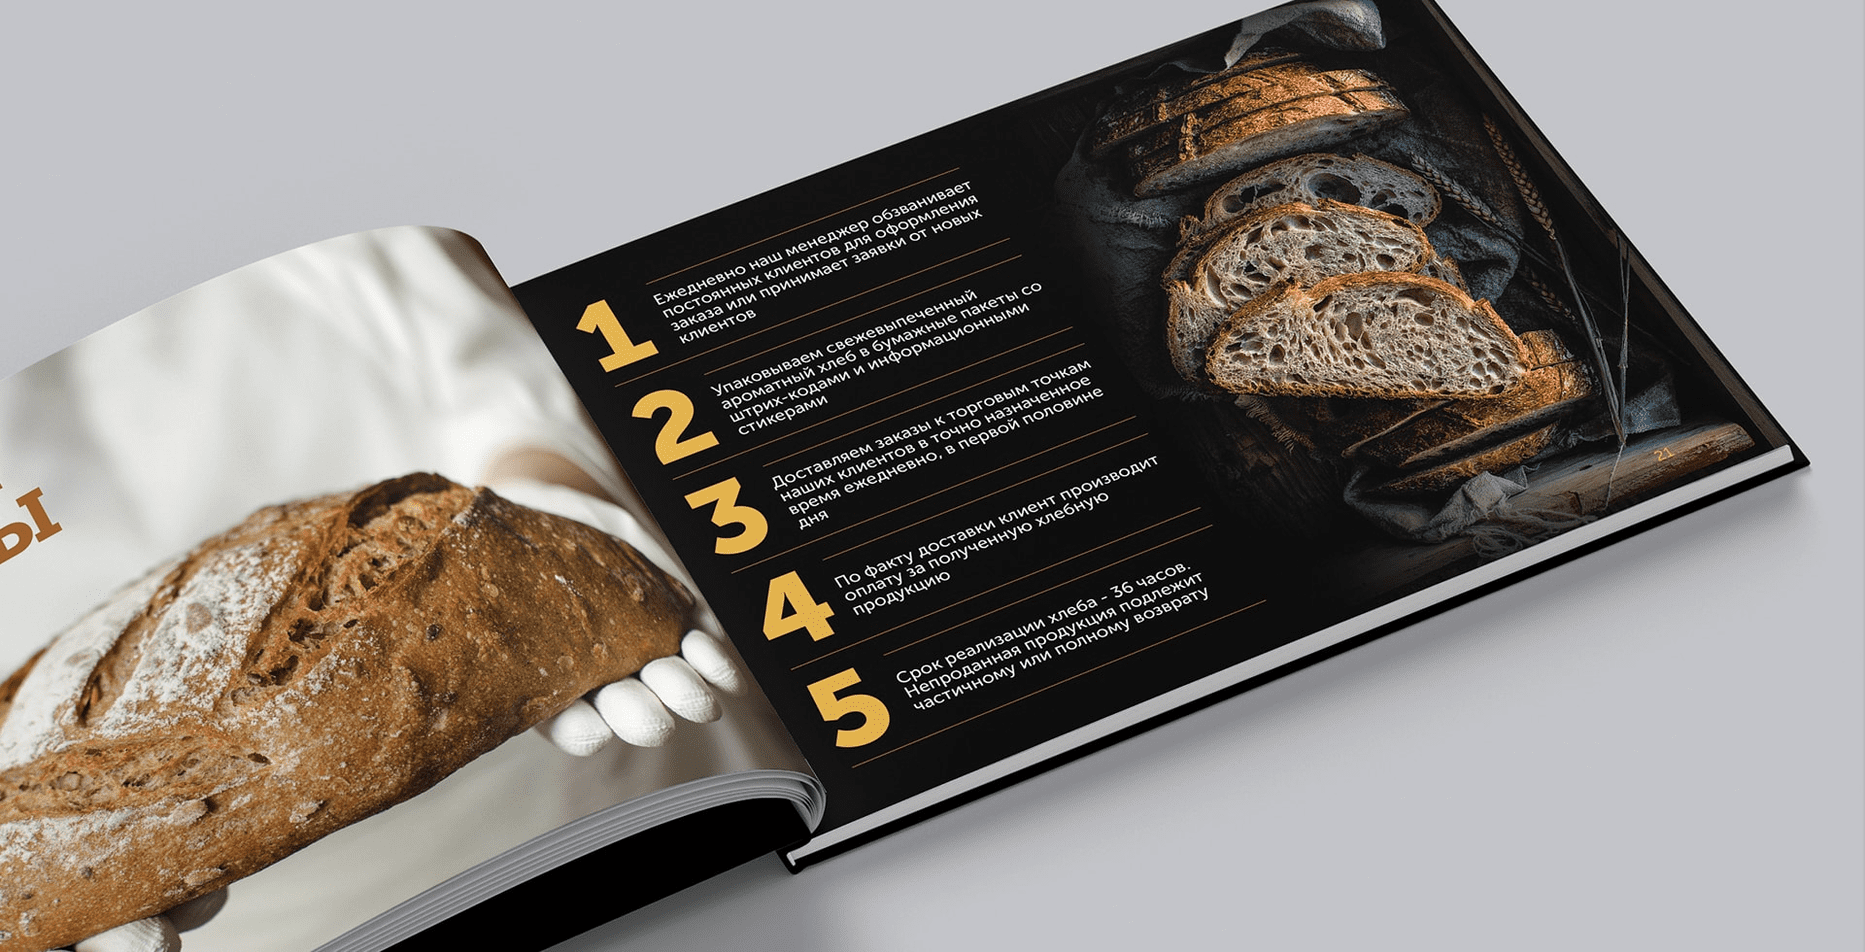 Case: logo design, branding and marketing kit for the bread business — Rubarb - Image - 14